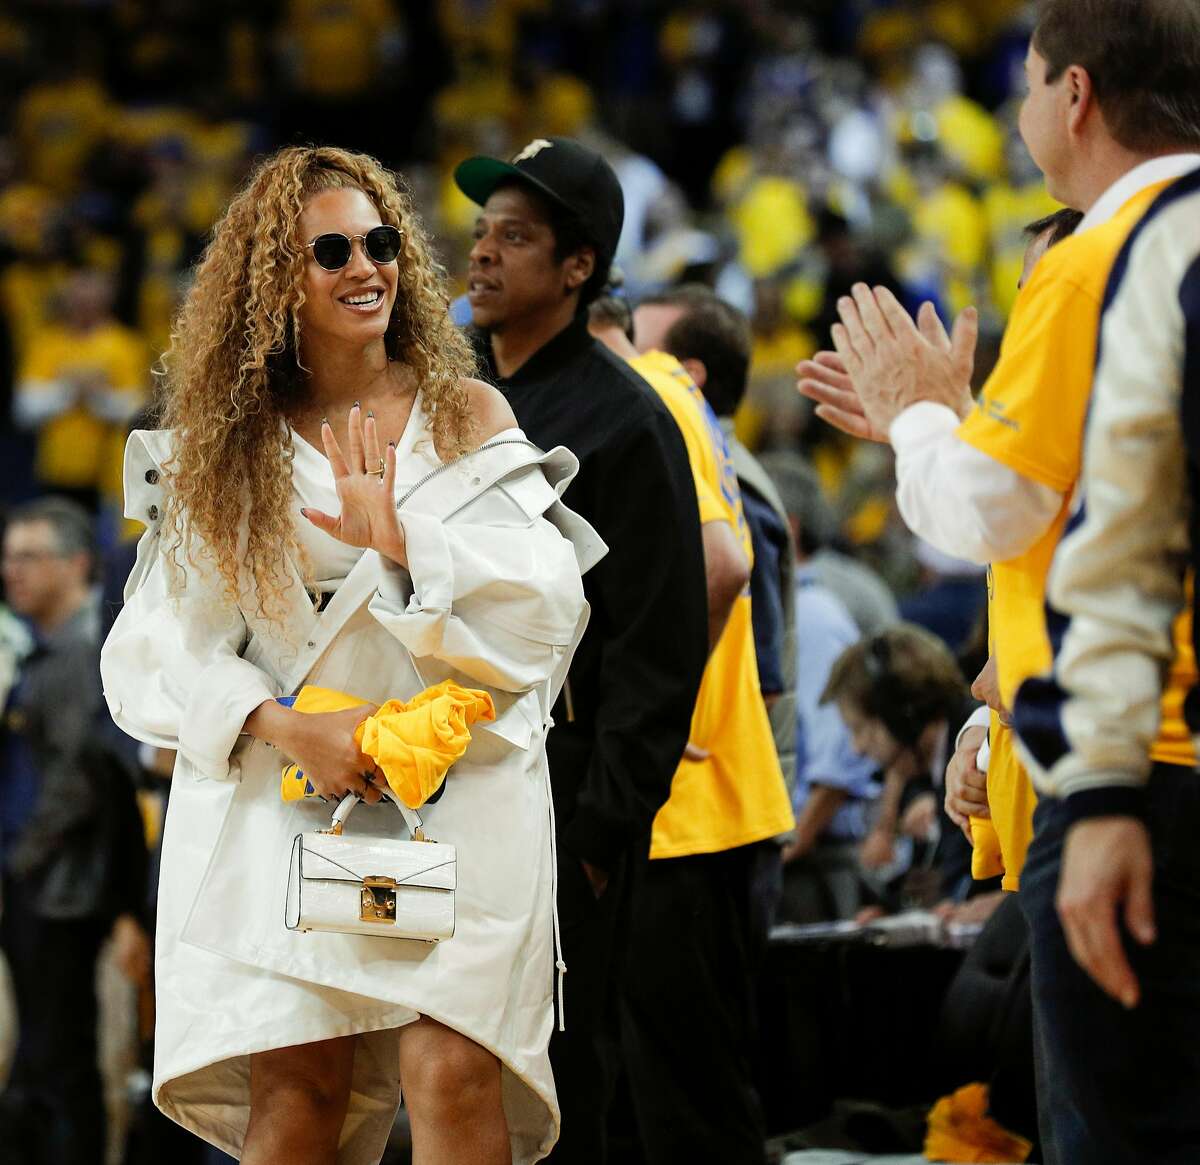 Beyonce waves good-bye to Joe Lacob in the fourth quarter during game 1 of round 2 of the Western Conference Finals between the Golden State Warriors and the New Orleans Pelicans at Oracle Arena on Saturday, April 28, 2018 in Oakland, Calif.